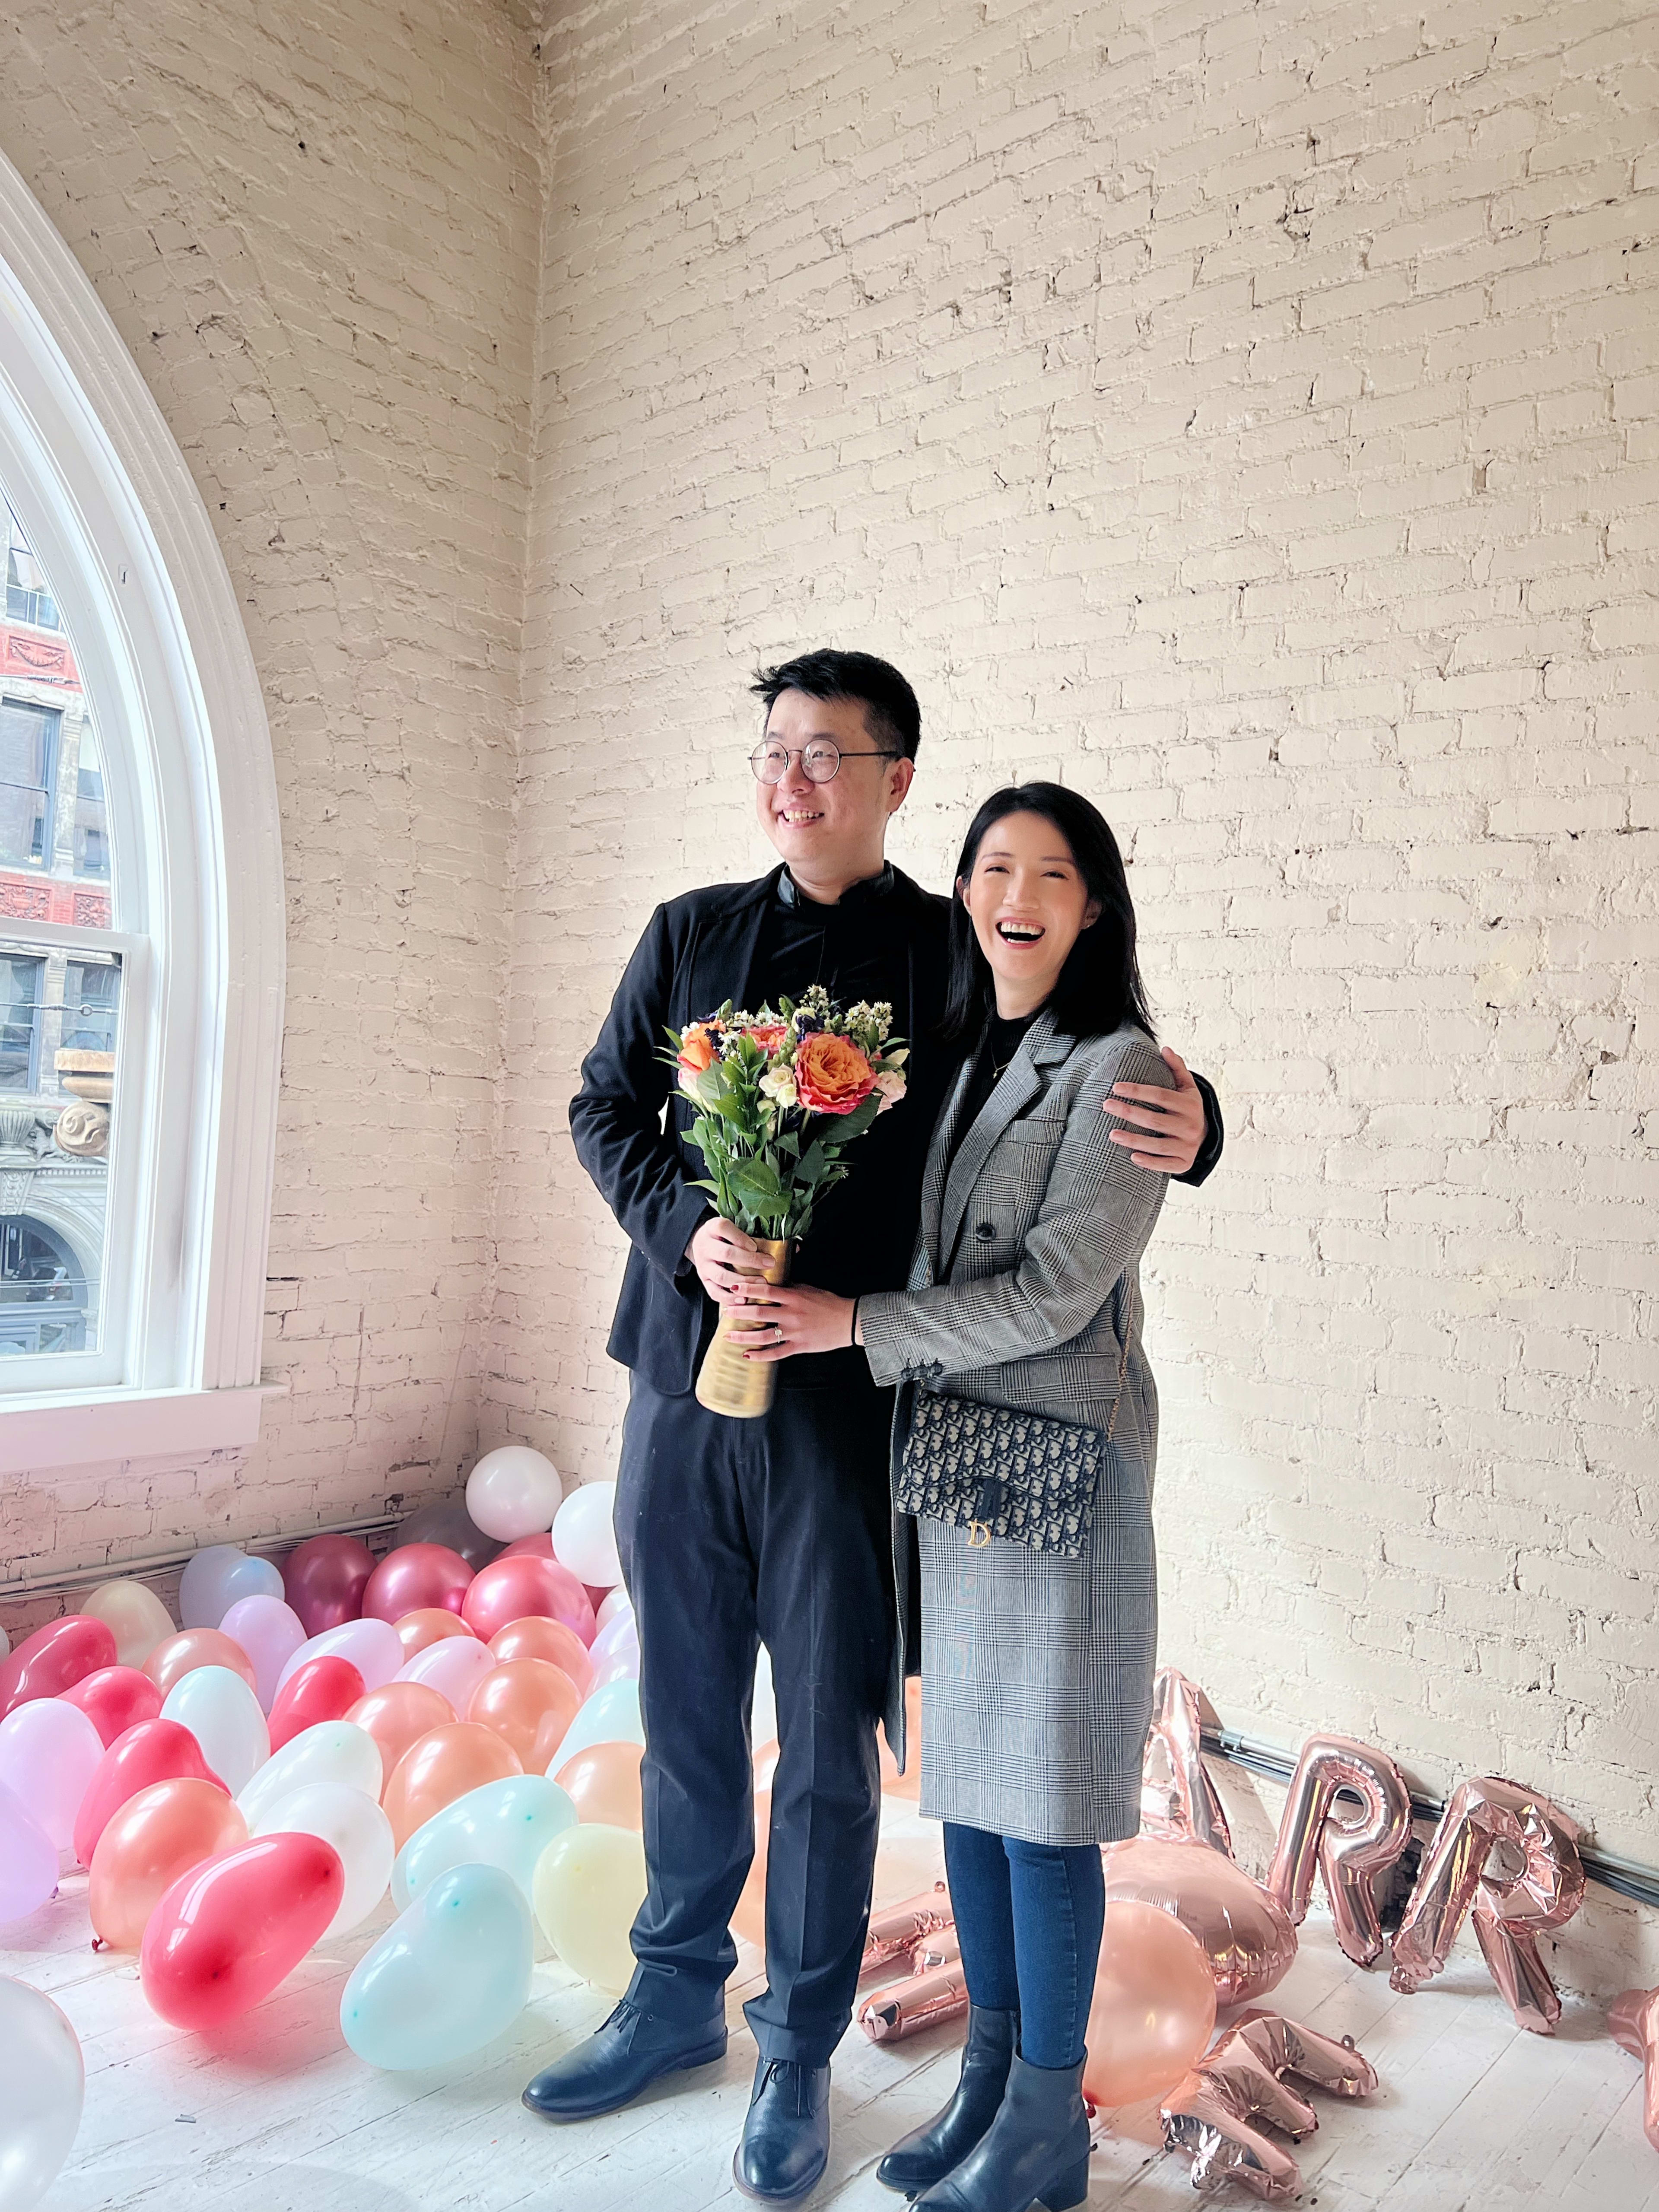 A man and woman standing next to each other in front of balloons at an engagement party.